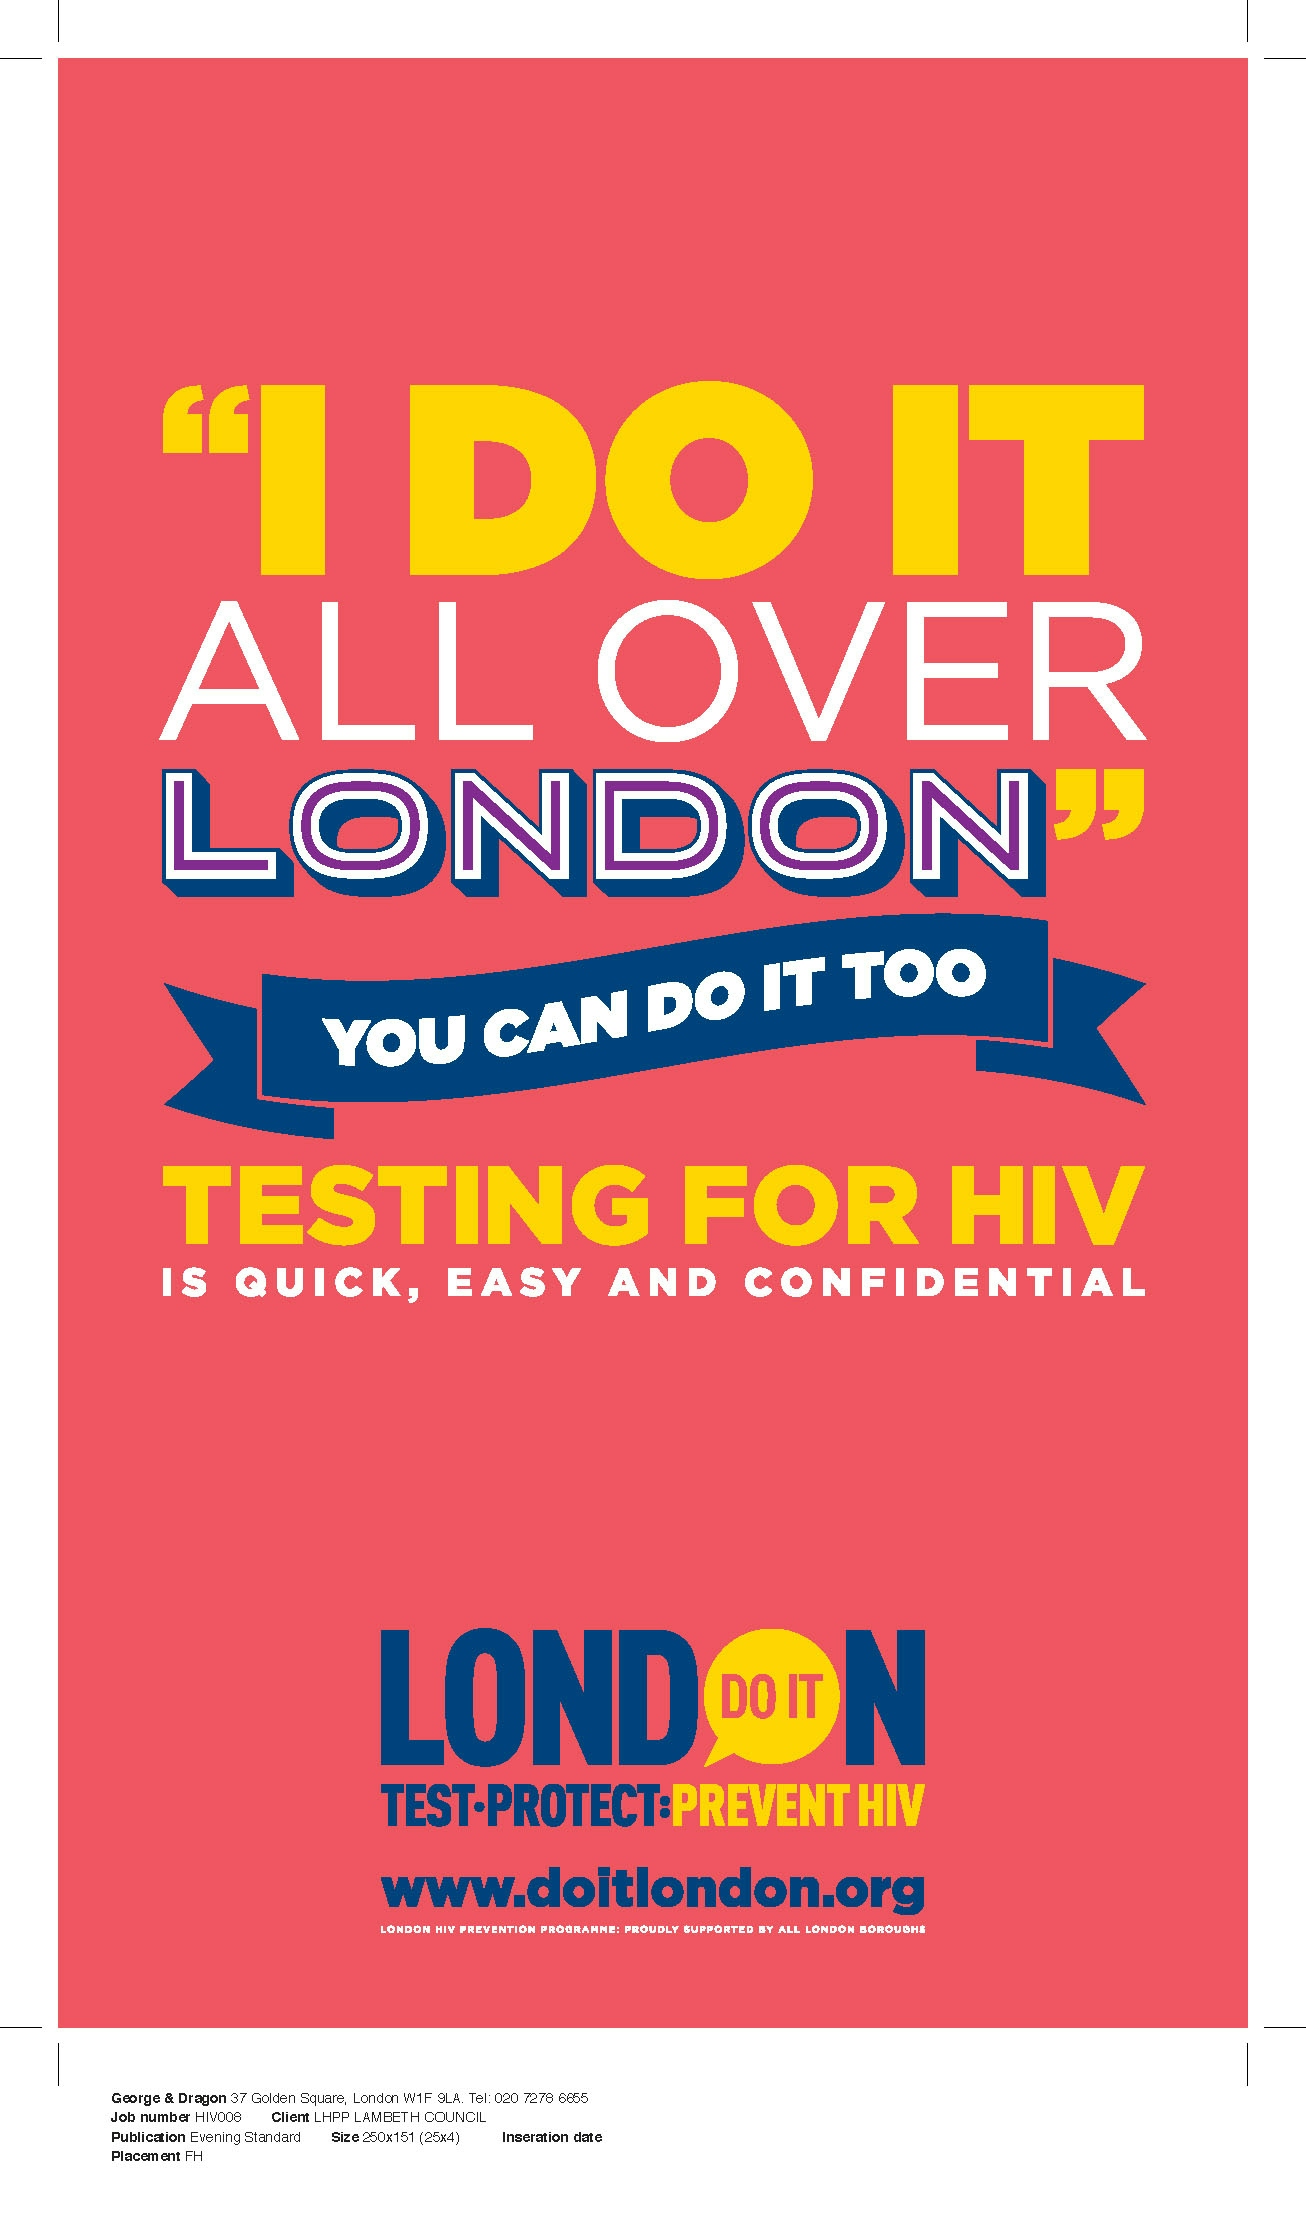 Do It London advertisement placed in the Evening Standard newspaper, which states: ""I do it all over London" You can do it too. Testing for HIV is quick, easy and confidential."